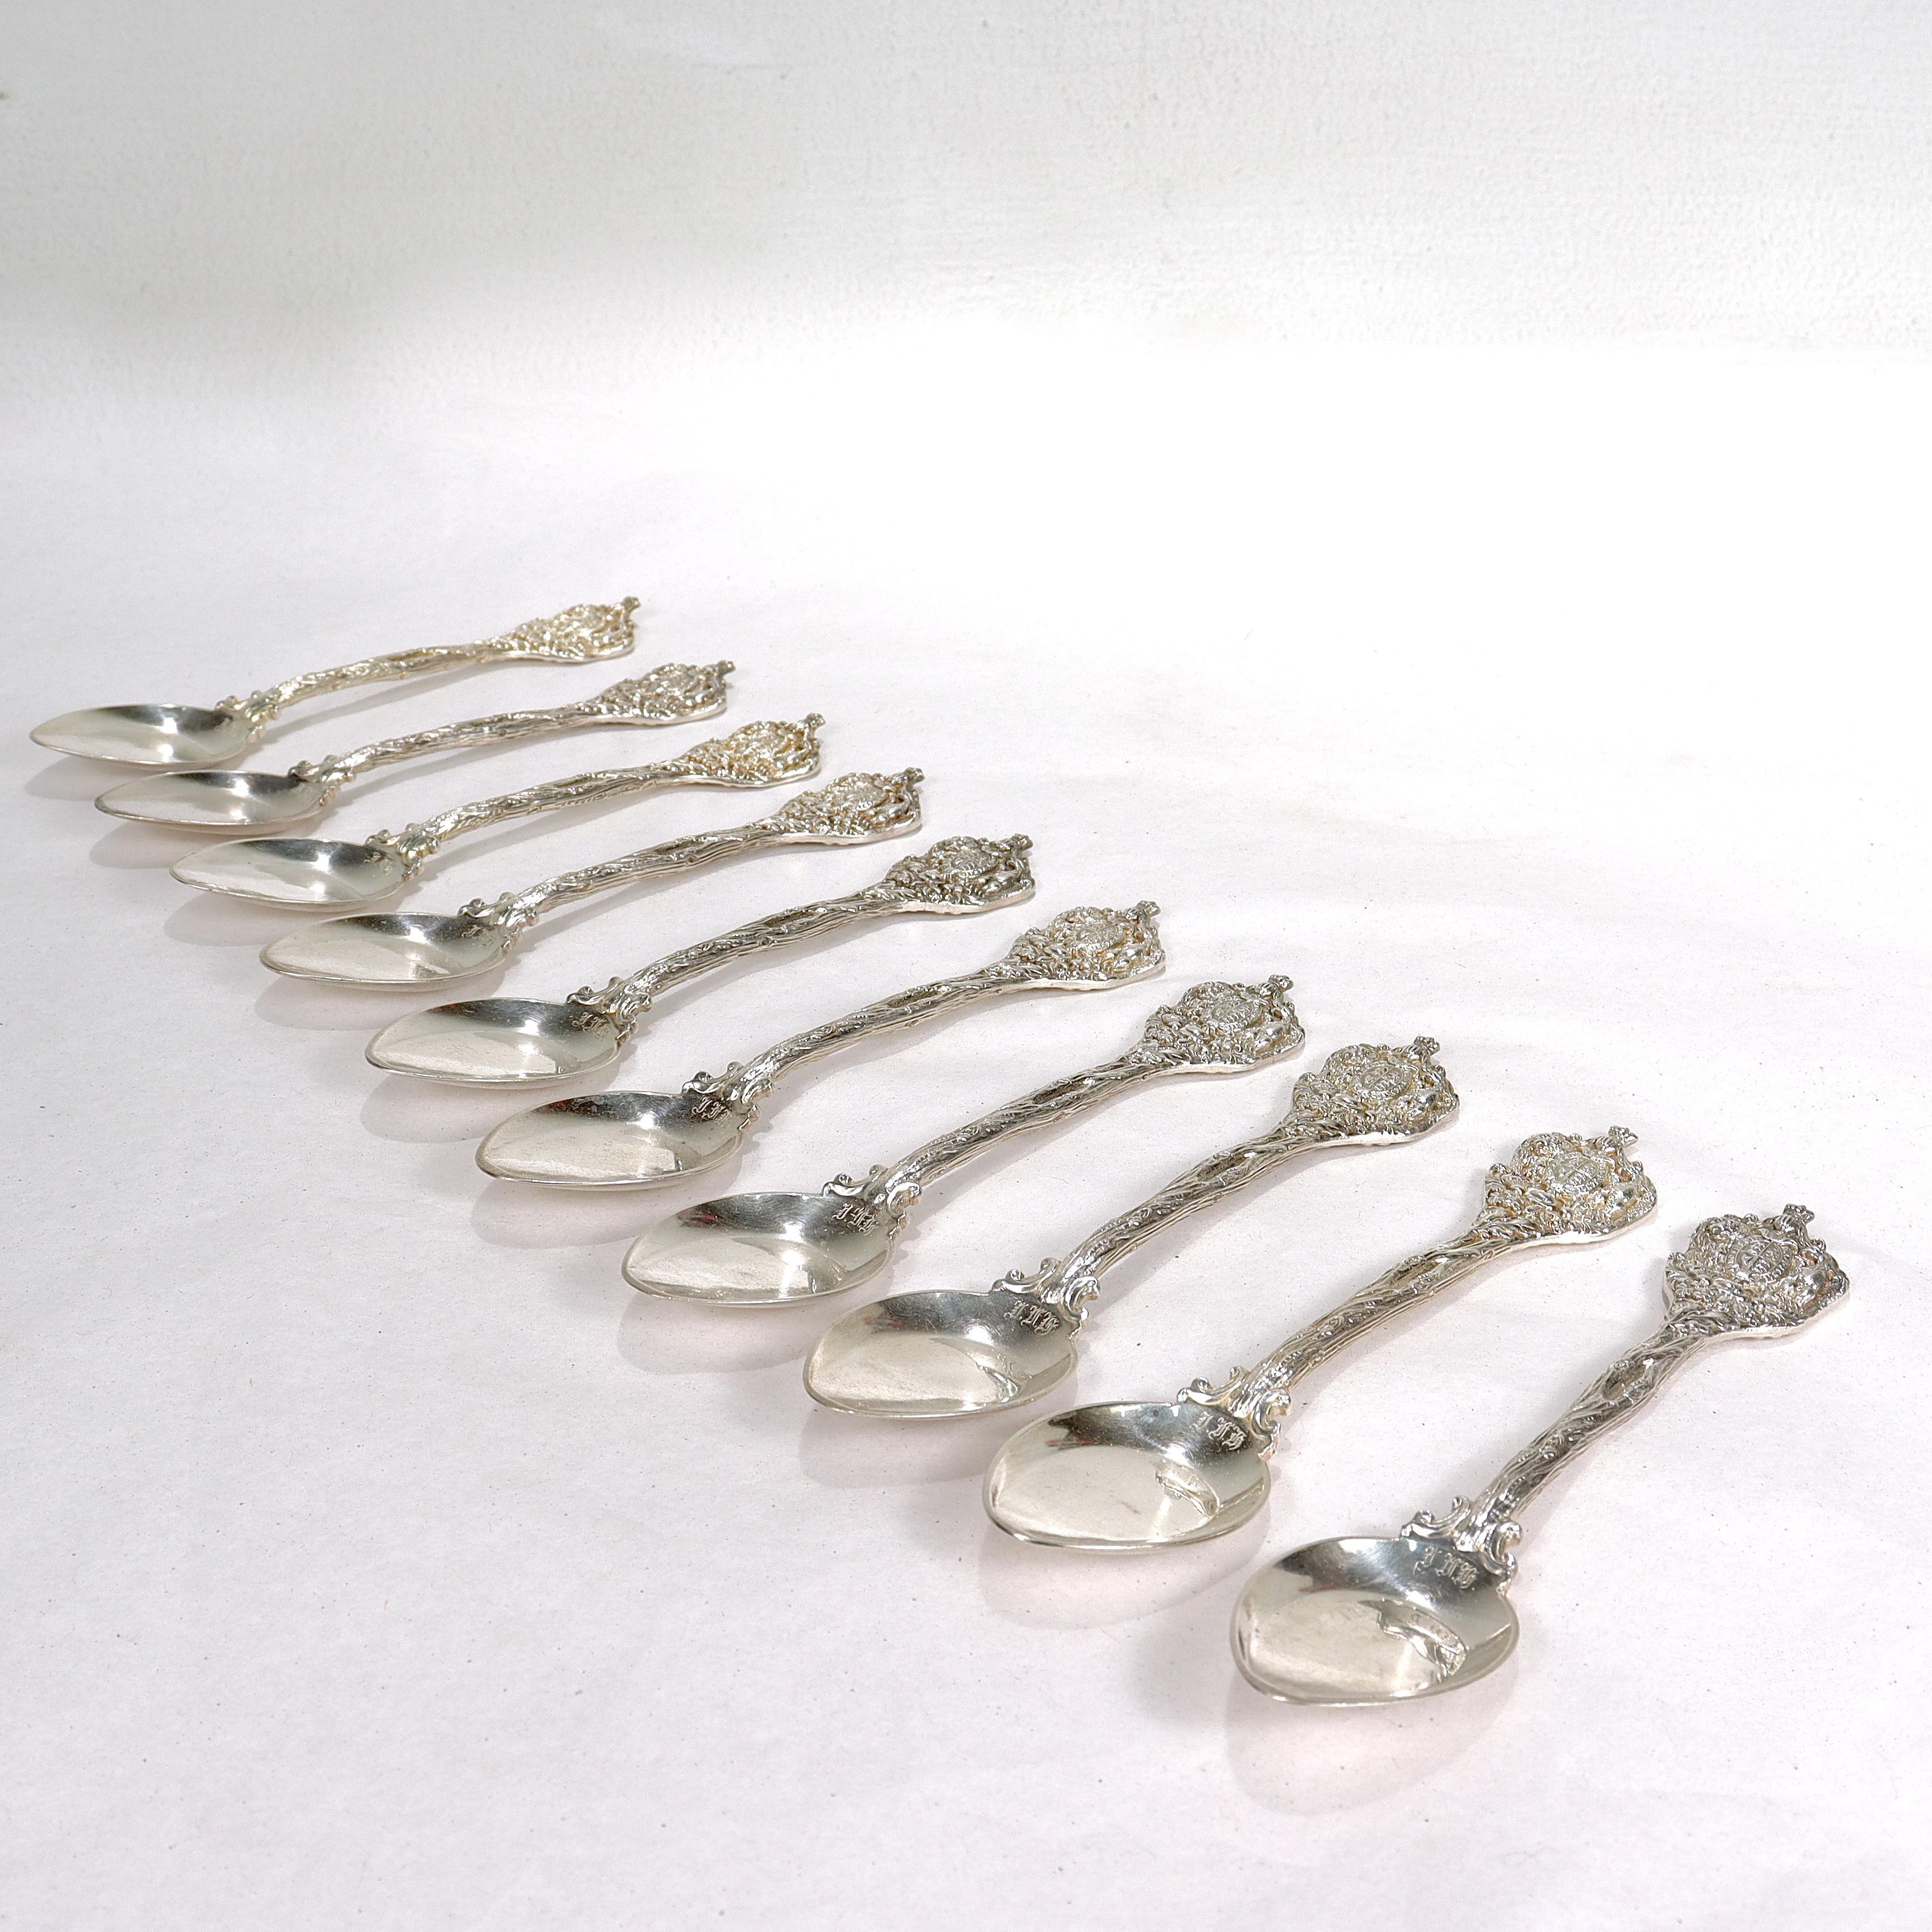 A fine set of antique English silver plated desert spoons or shovels. 

By Elkington & Co.

Each spoon with a shovel shaped bowl, a figural handle in the shape of an oak branch with acorns and oak leaves, and a finial in the shape of the English